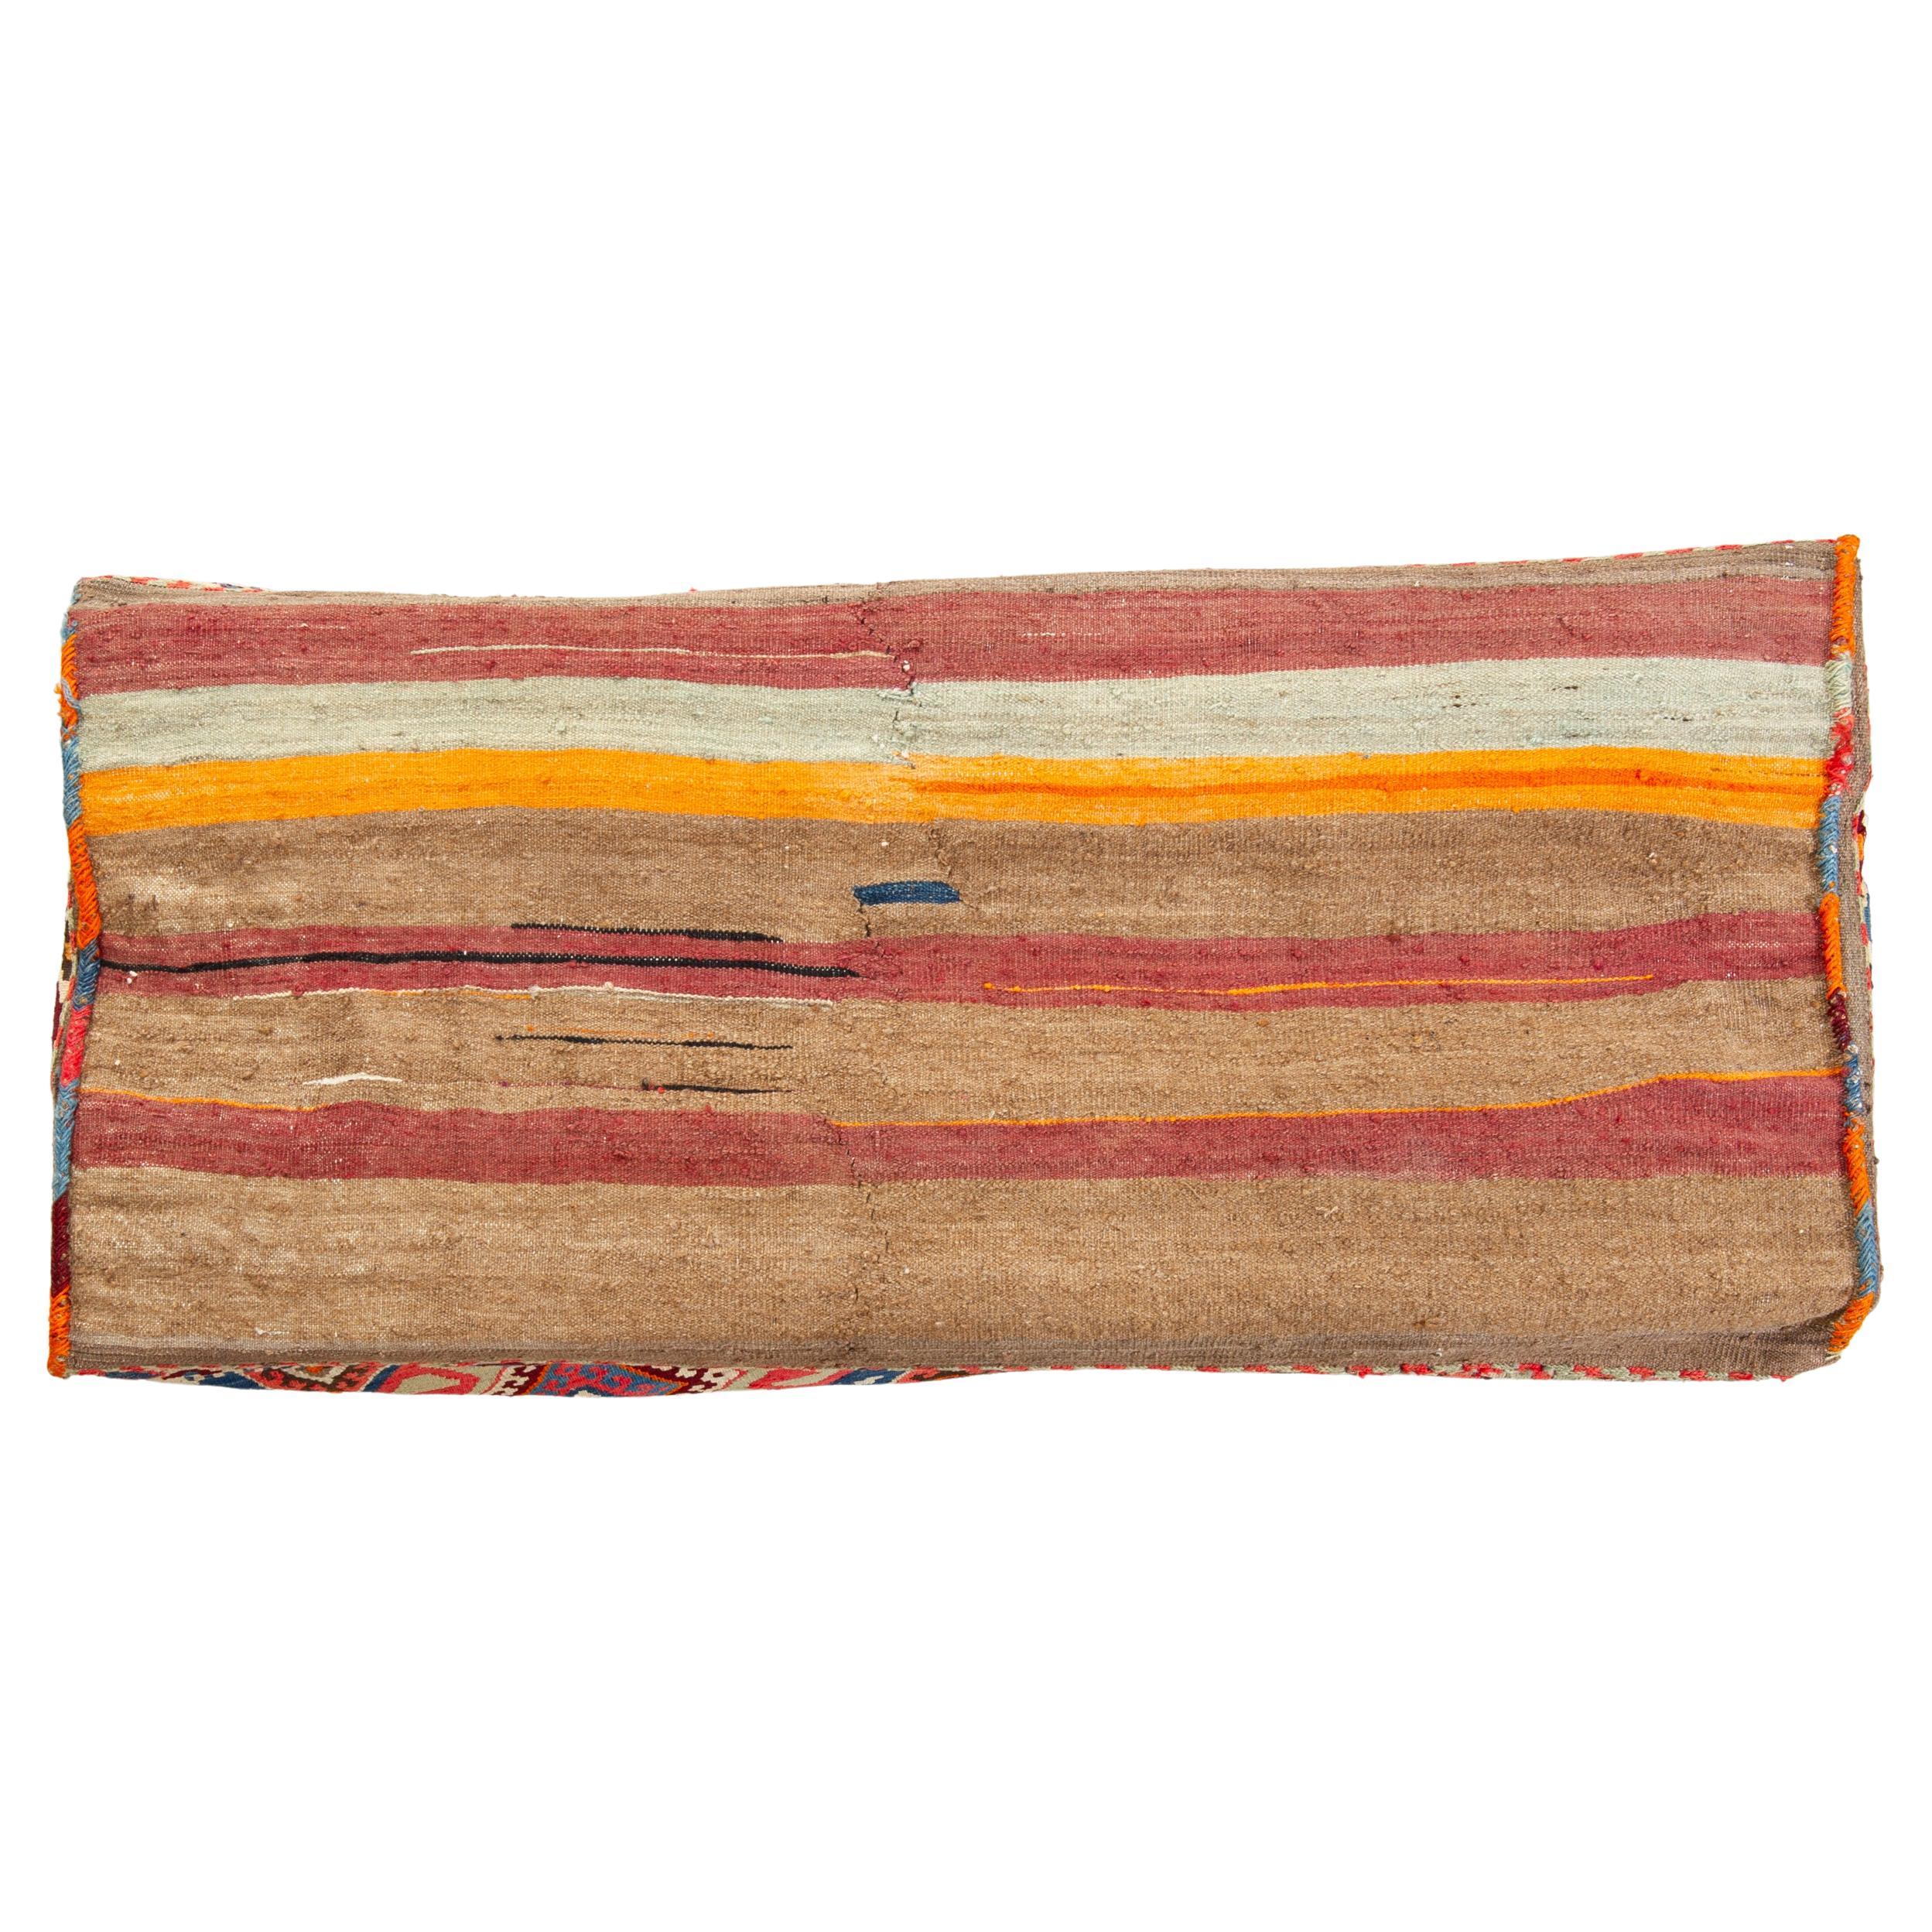 Other Rare Pair of Shahsavan Kilim Truncks as Benches For Sale